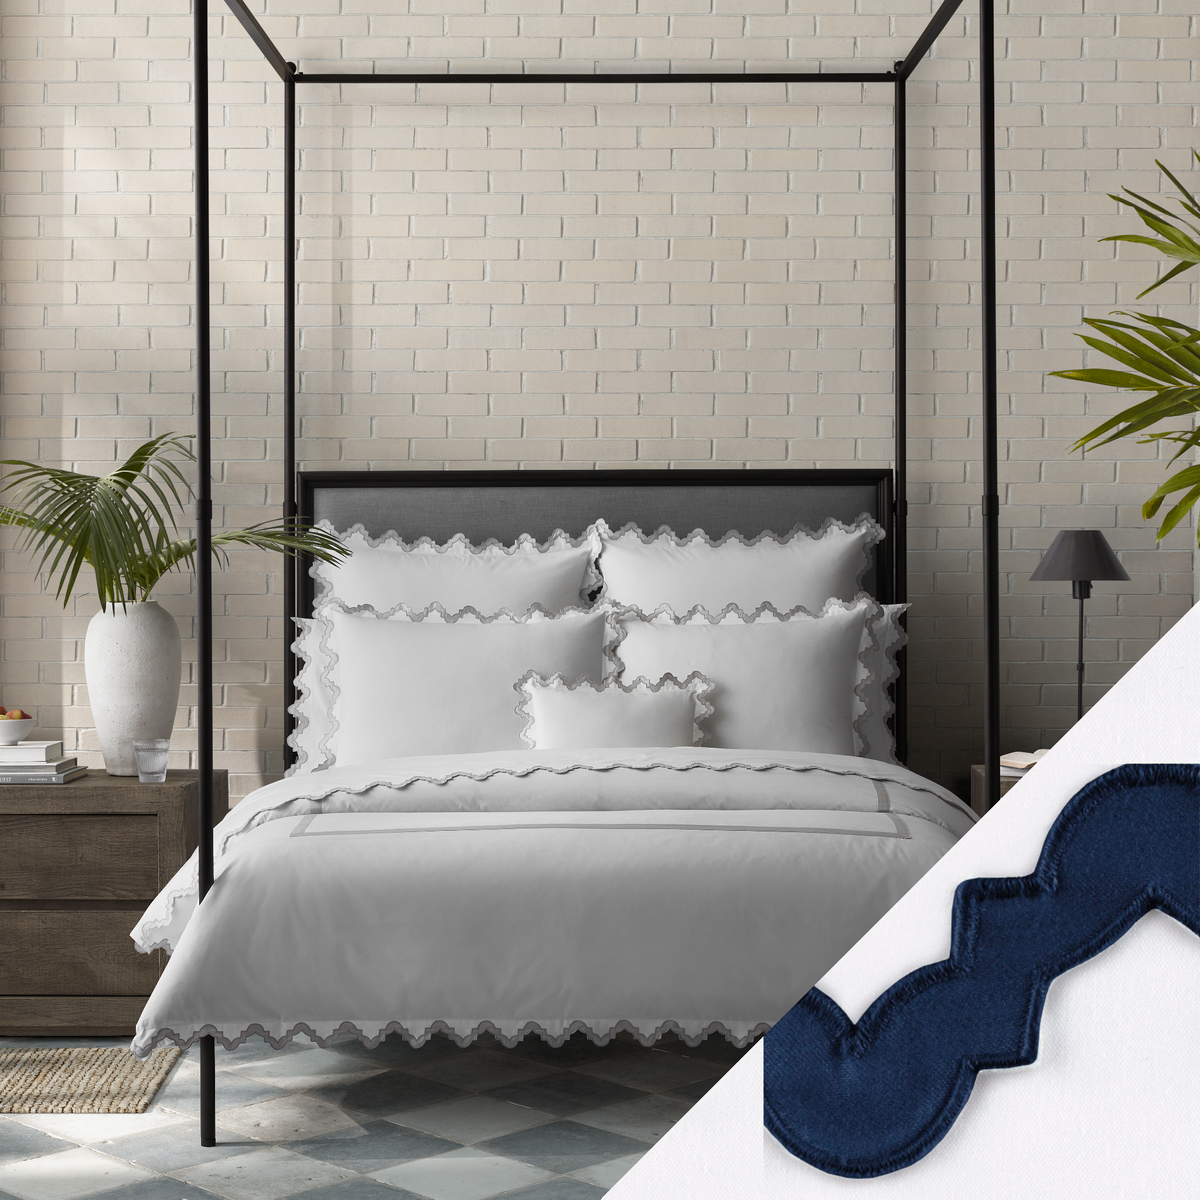 Lifestyle Image of a Full Bed Dressed in Matouk Aziza Bedding in Silver Color with Navy Swatch